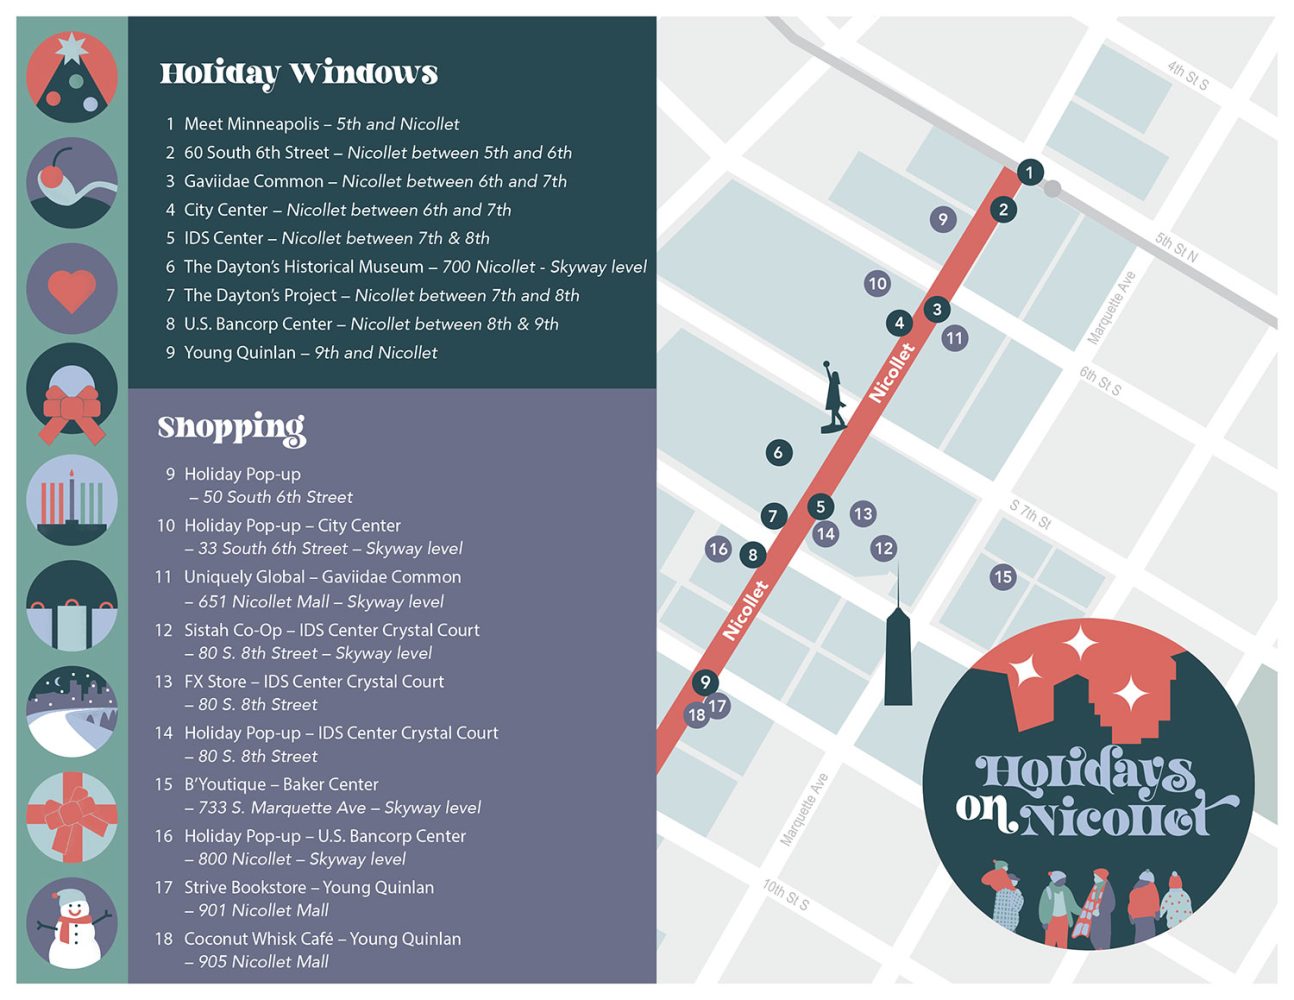 Map of locations downtown Minneapolis for the Holidays on Nicollet promotion.